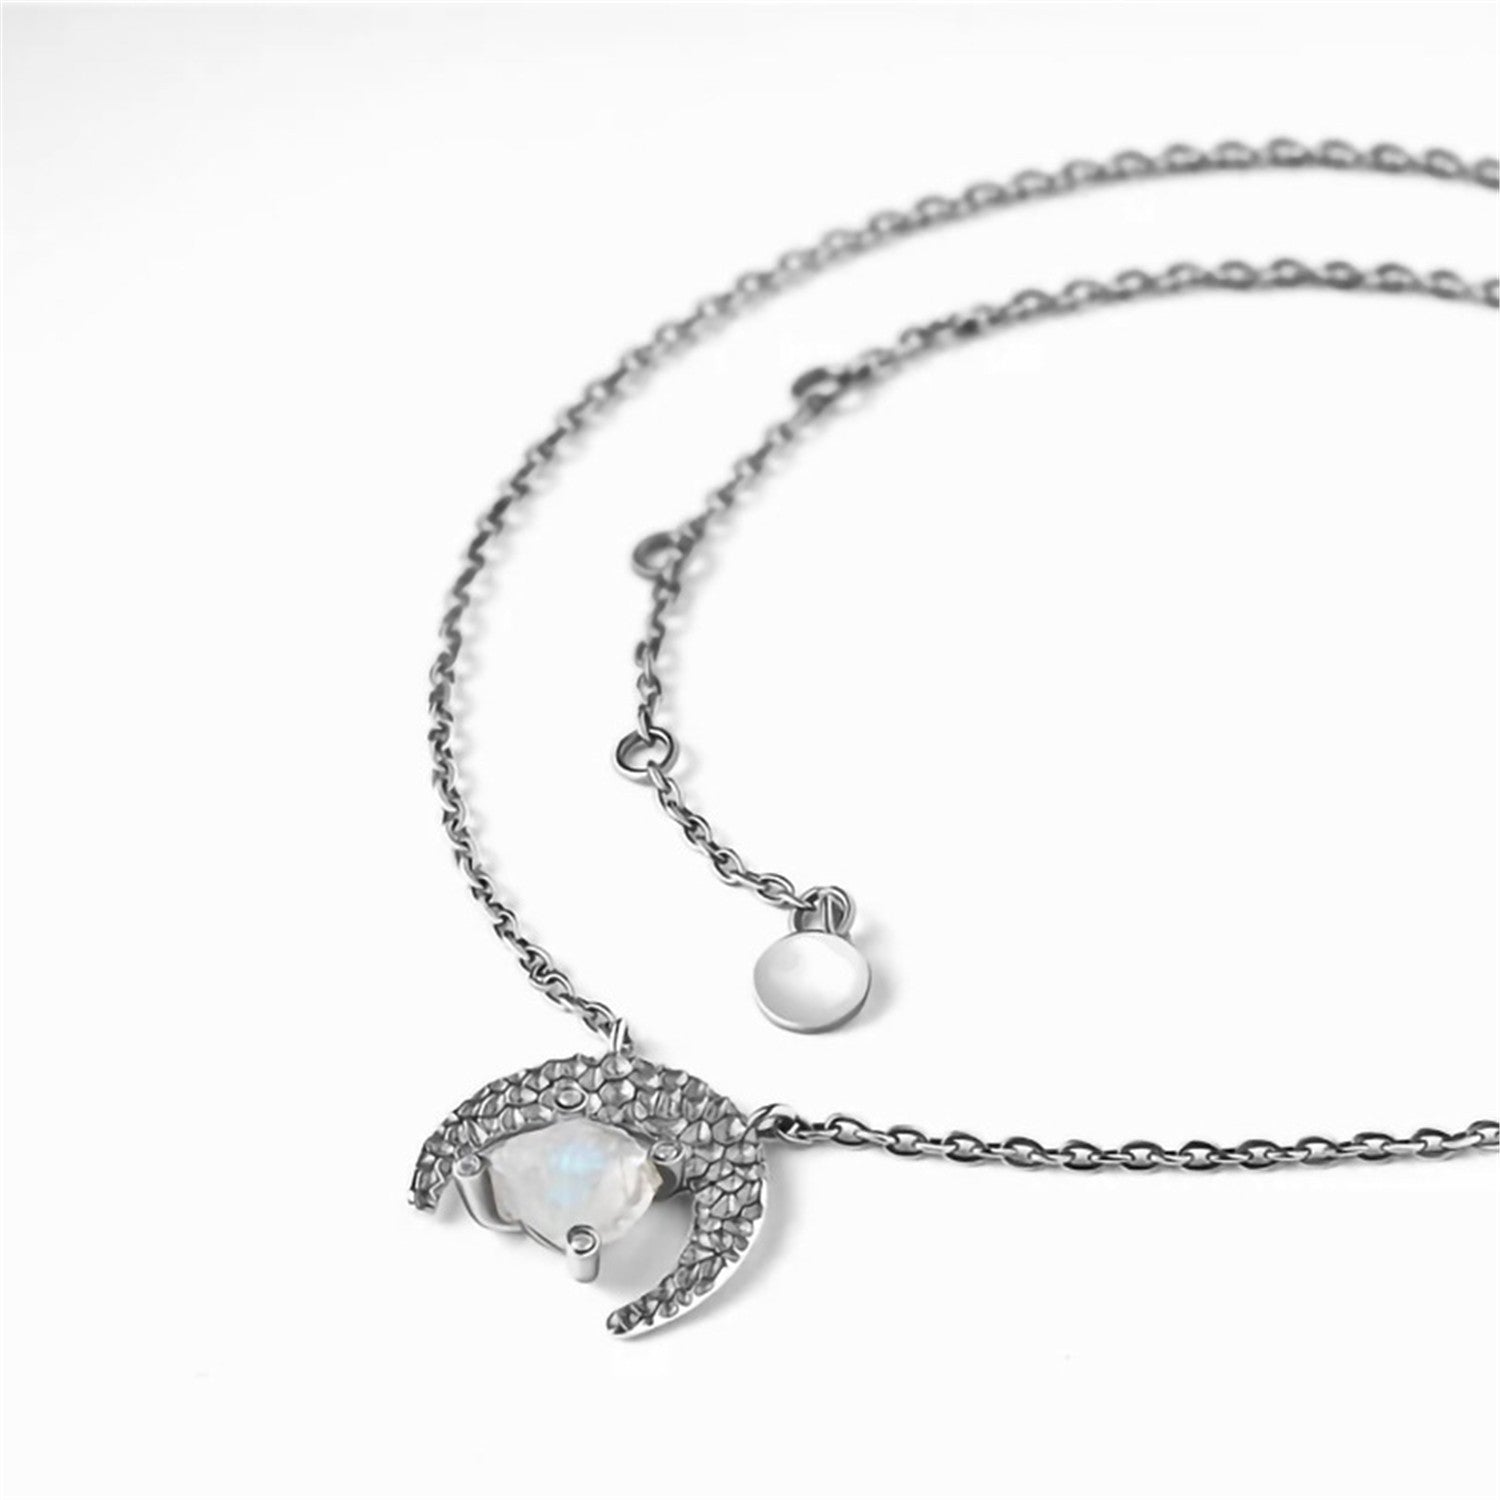 Moonstone Pendant,s925 Silver,With Crescent Moon Design